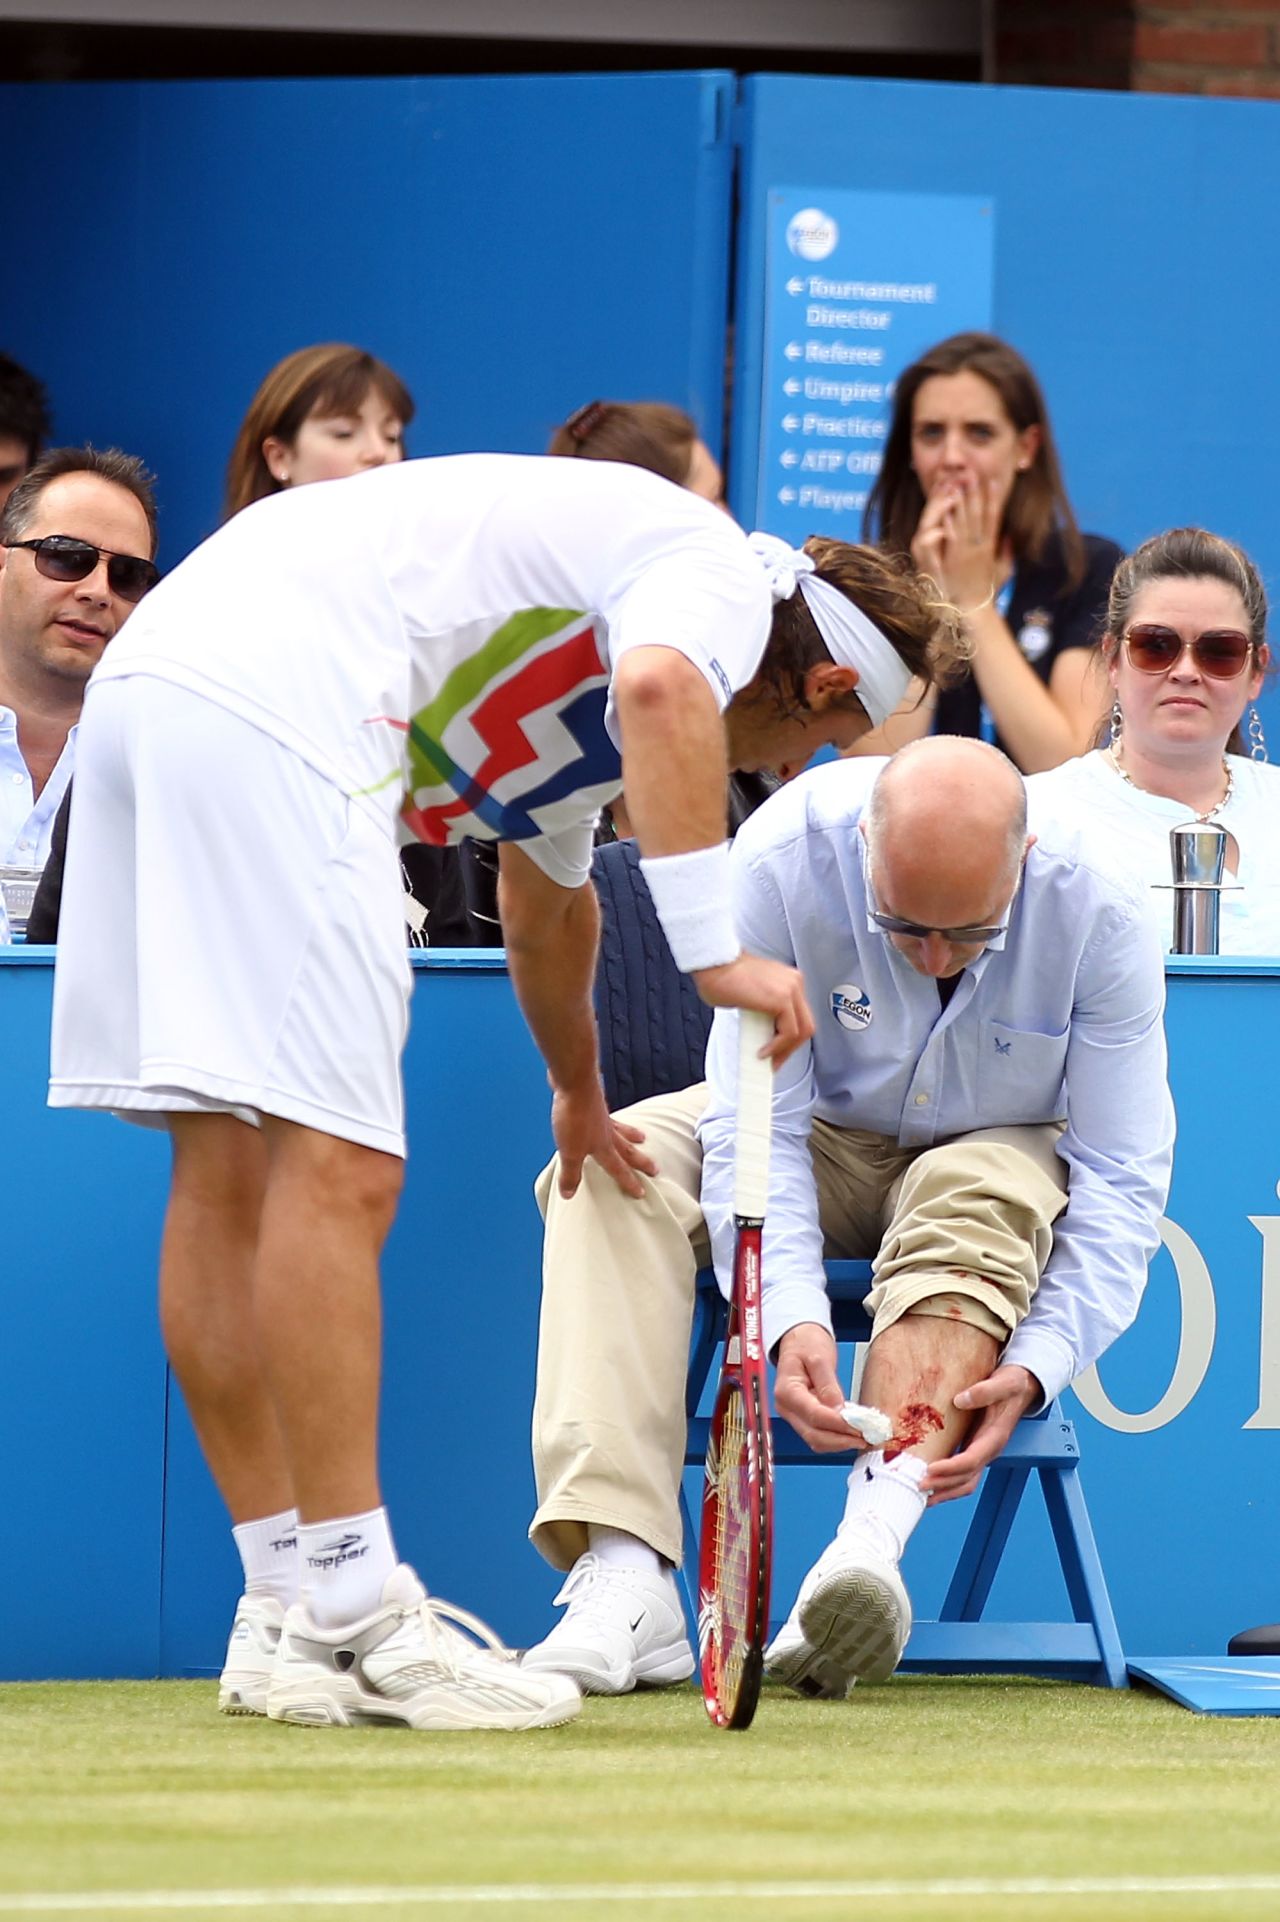 David Nalbandian was disqualified from the Queen's Club final on Sunday for inadvertently injuring a match official after kicking an advertising board. But the Argentine is not the first tennis star to lose their cool on court...